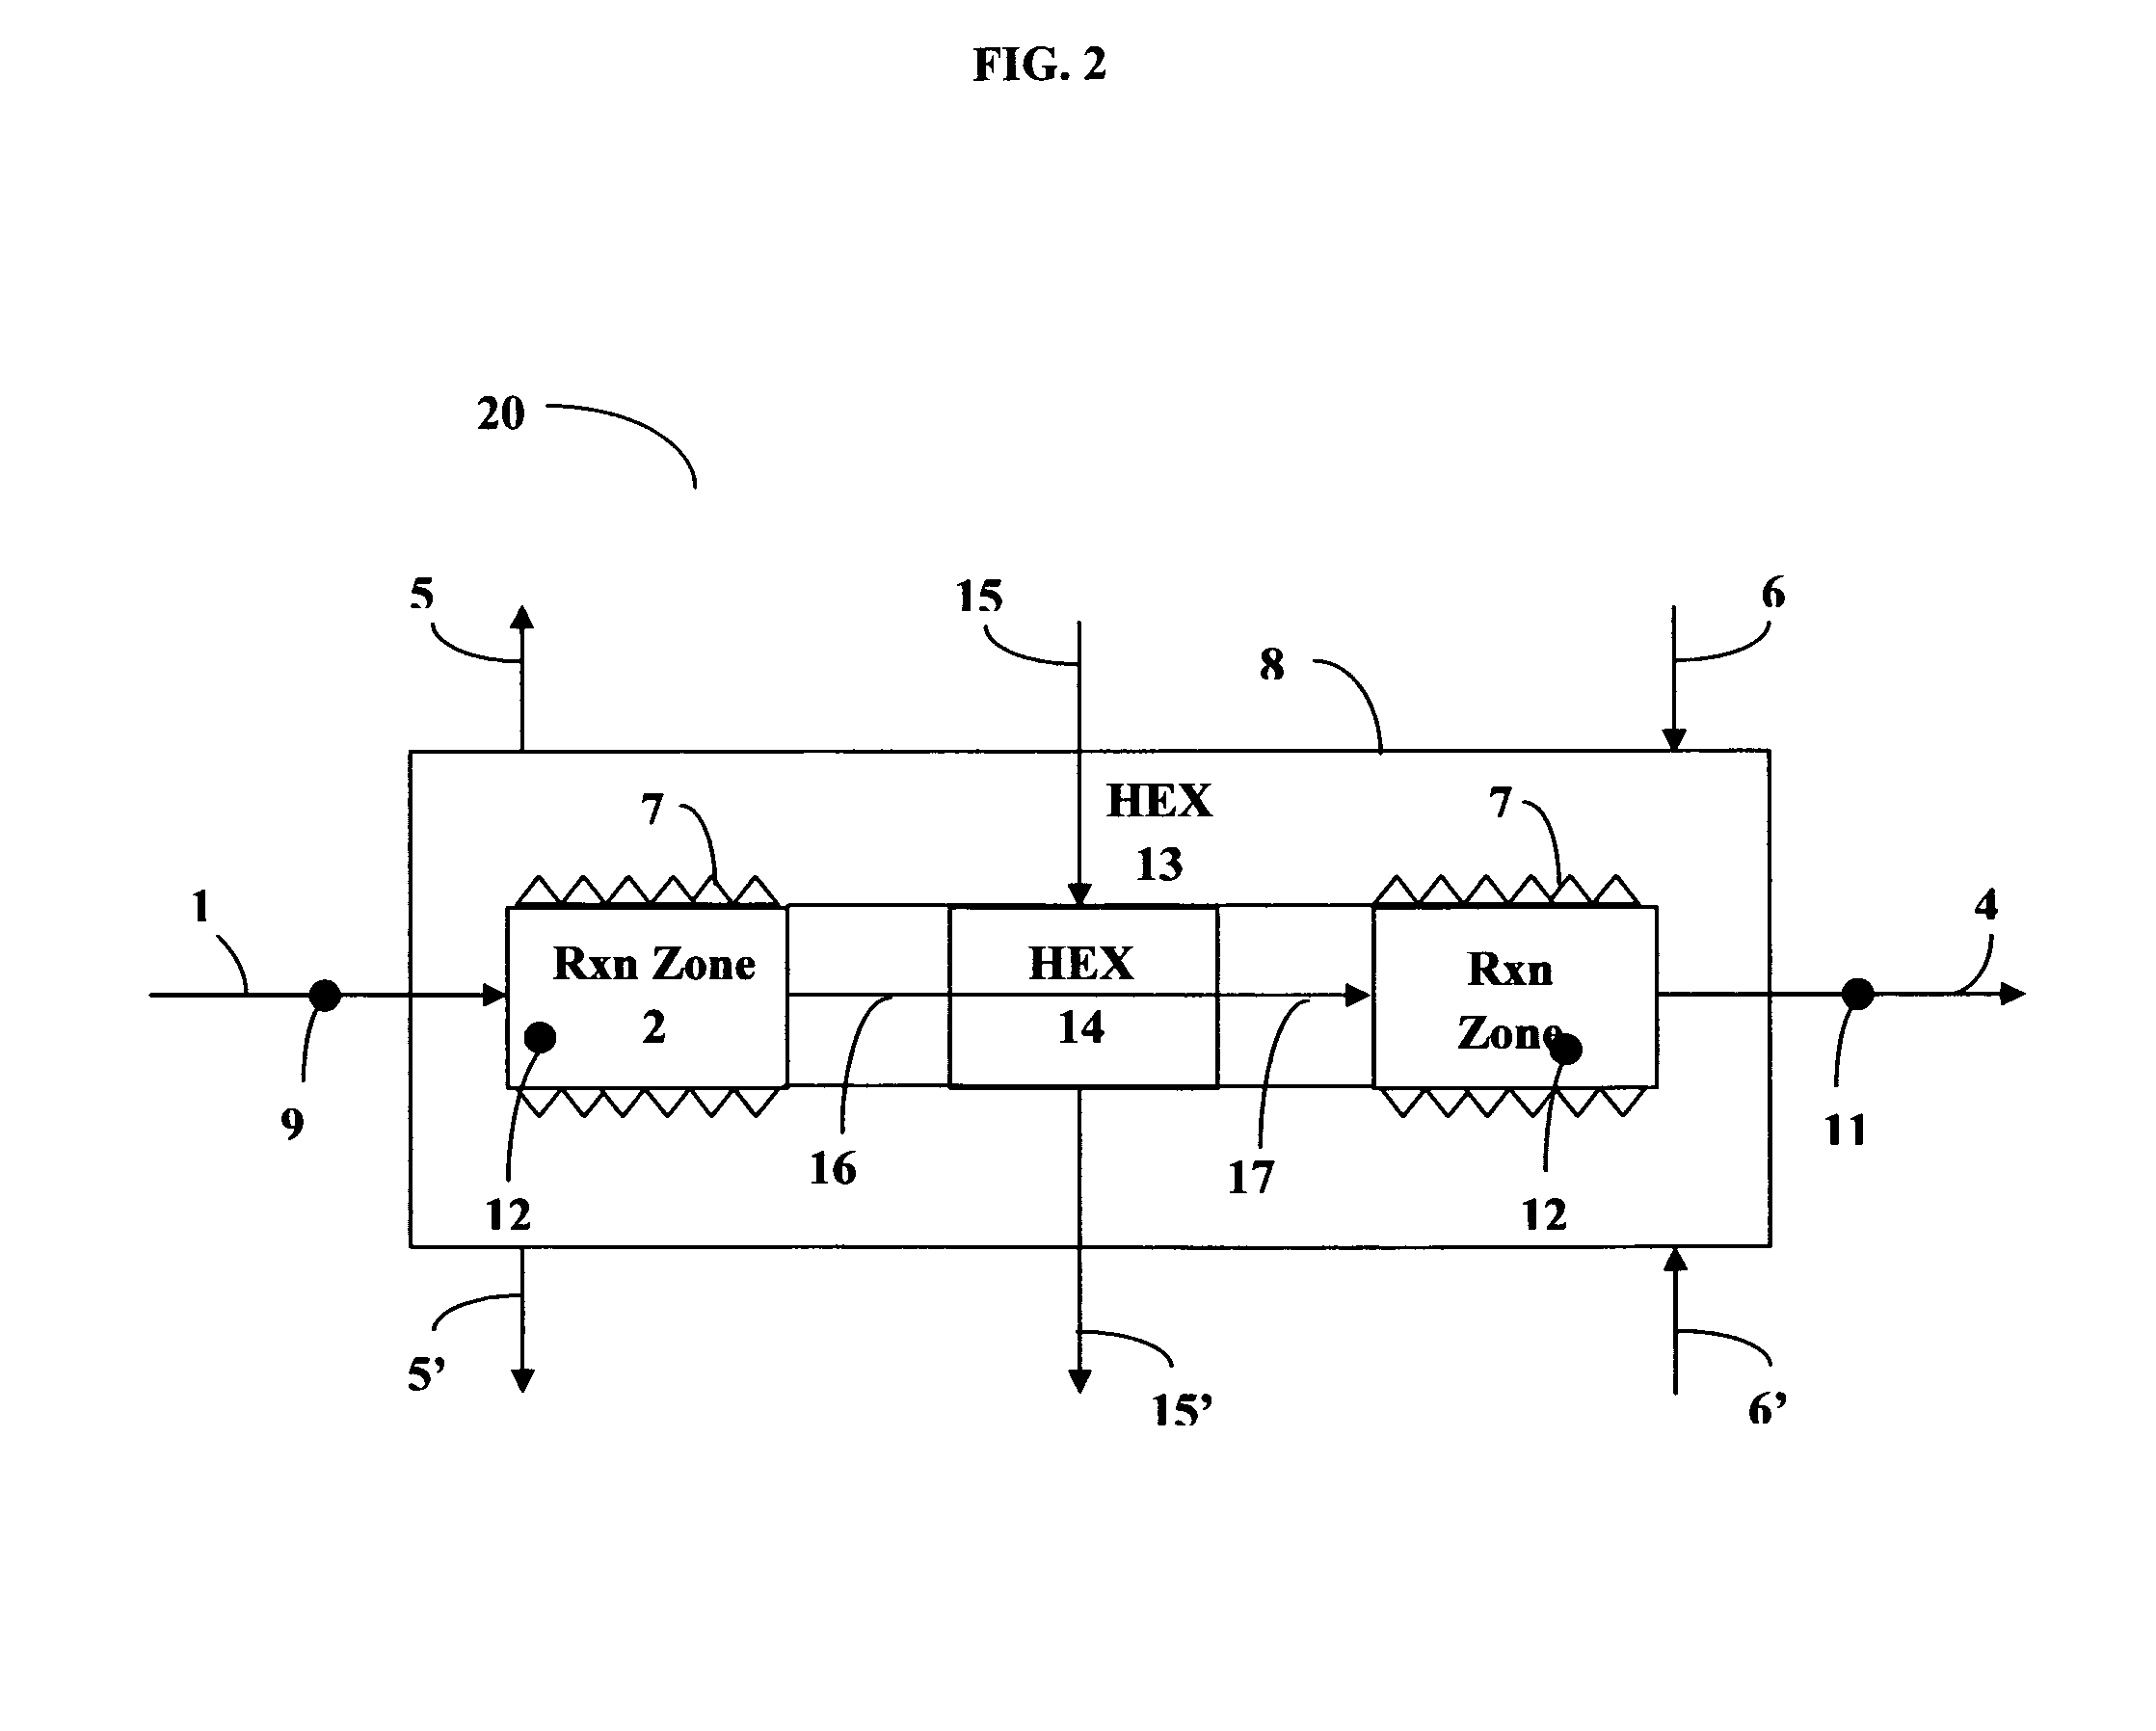 Sabatier process and apparatus for controlling exothermic reaction